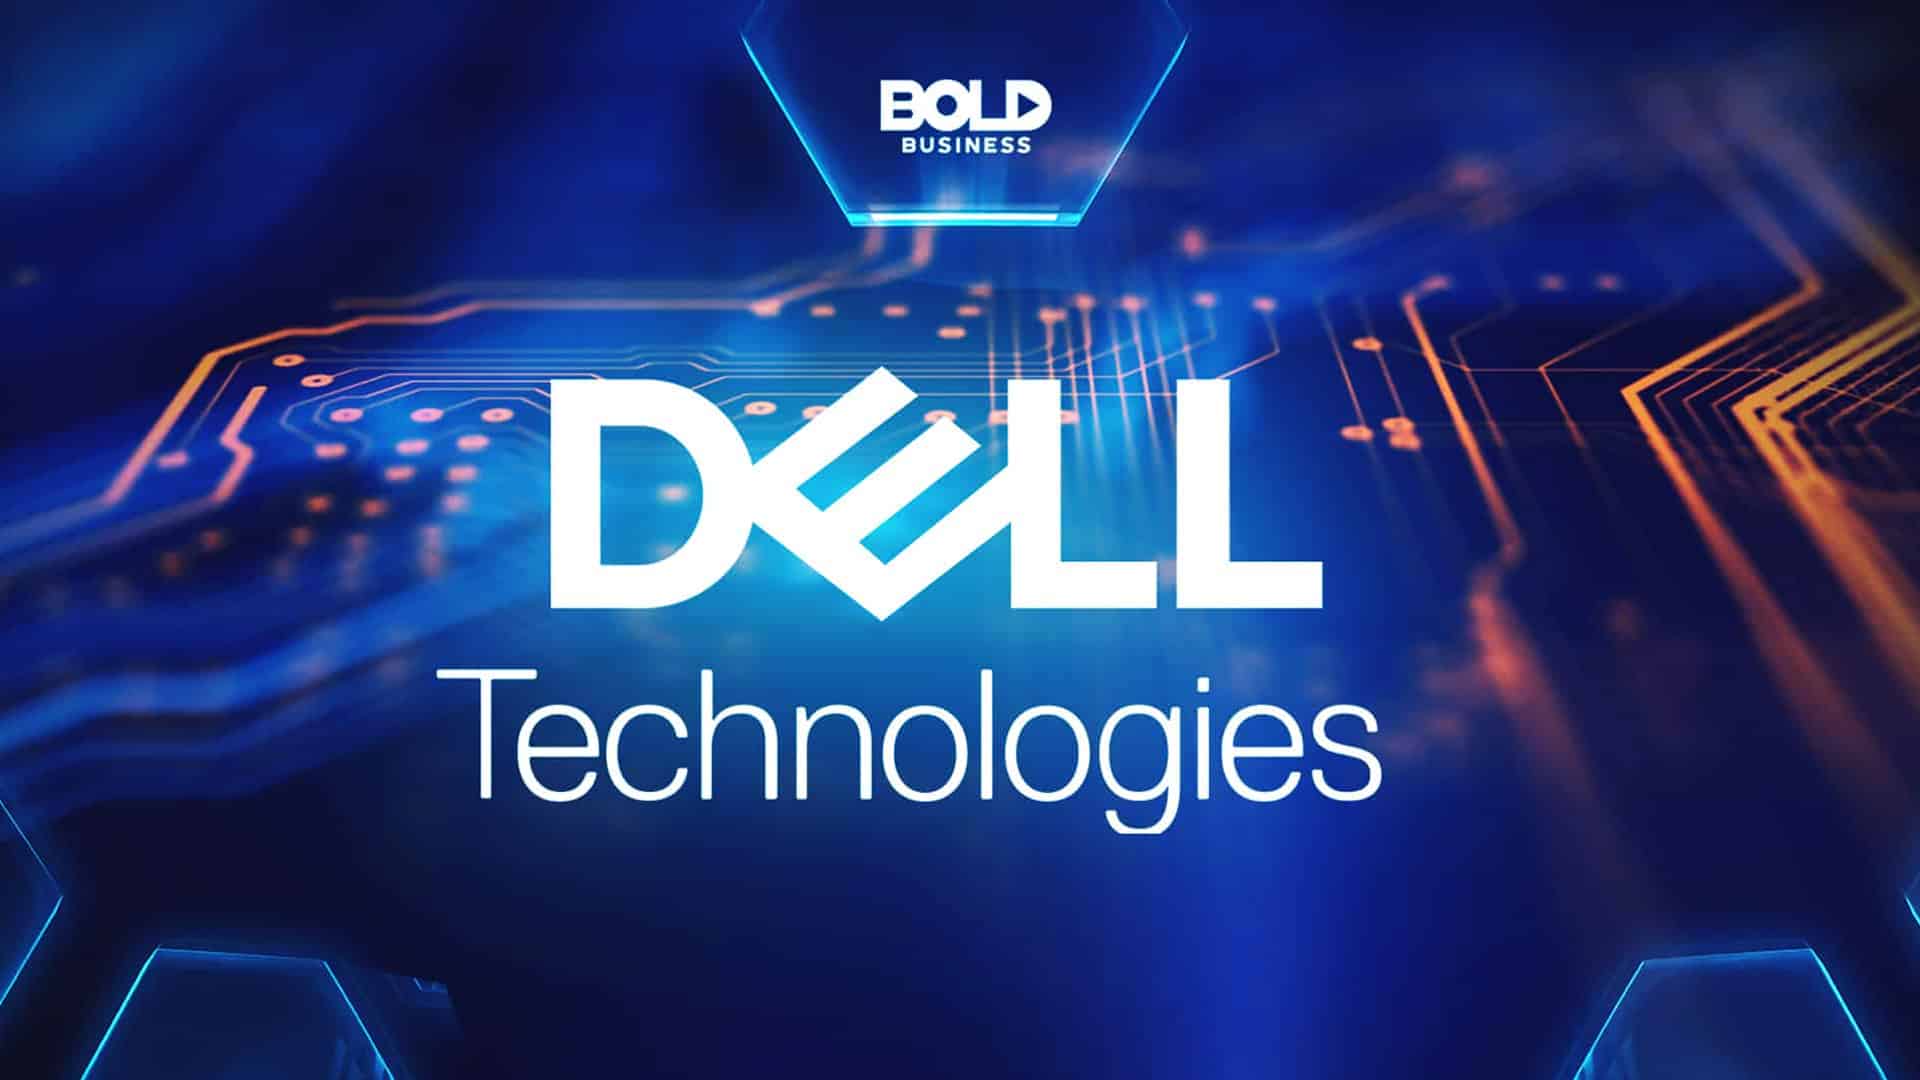 MeitY Startup Hub Partners with Dell Technologies to Build Robust Start-up Ecosystem